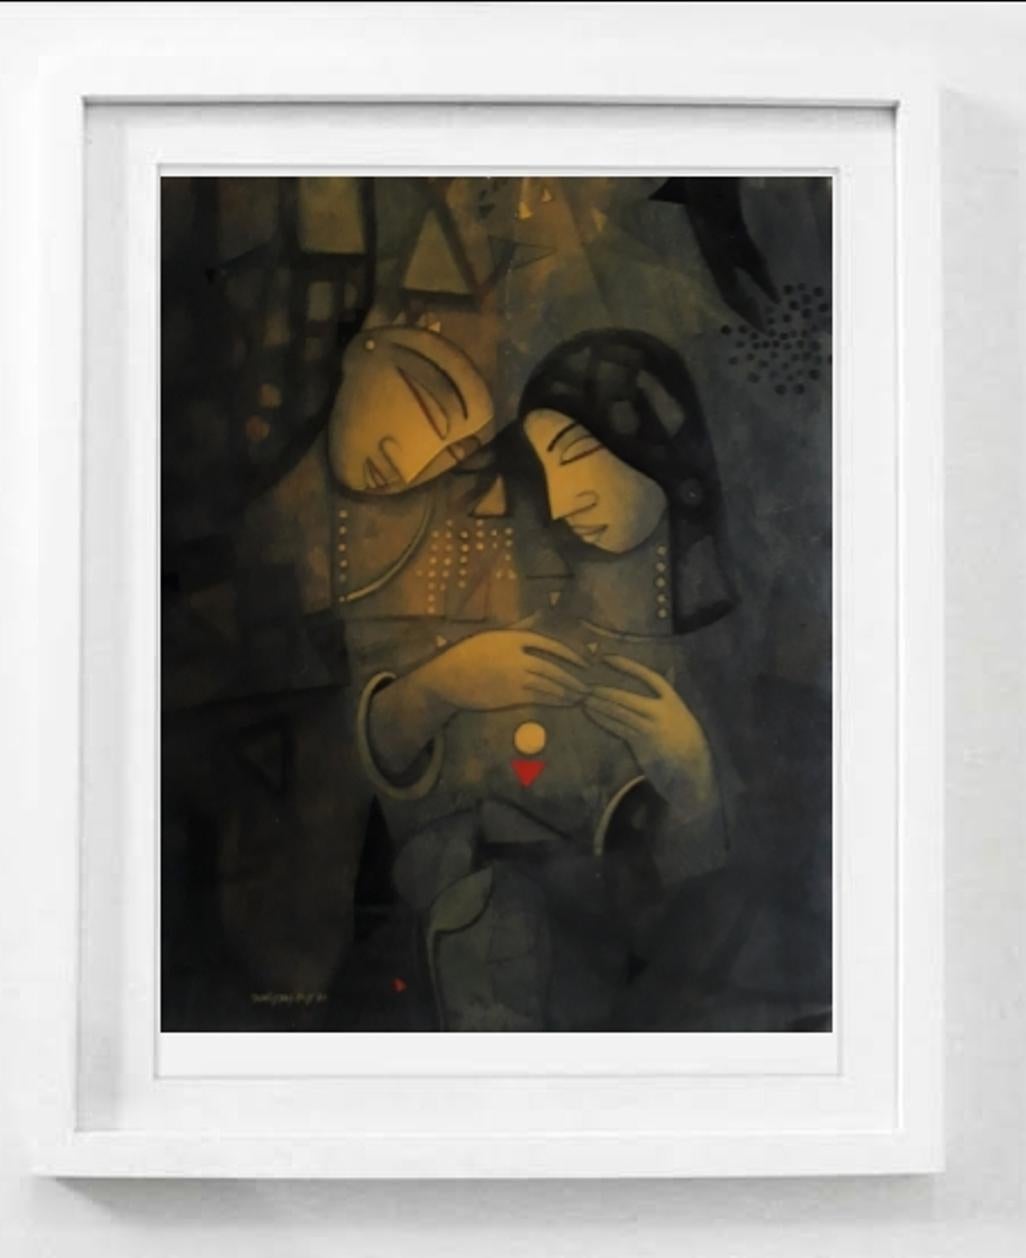 Samir Sarkar Figurative Painting - Untitled, Figurative, Mixed Media on Paper by Contemporary Artist “In Stock”